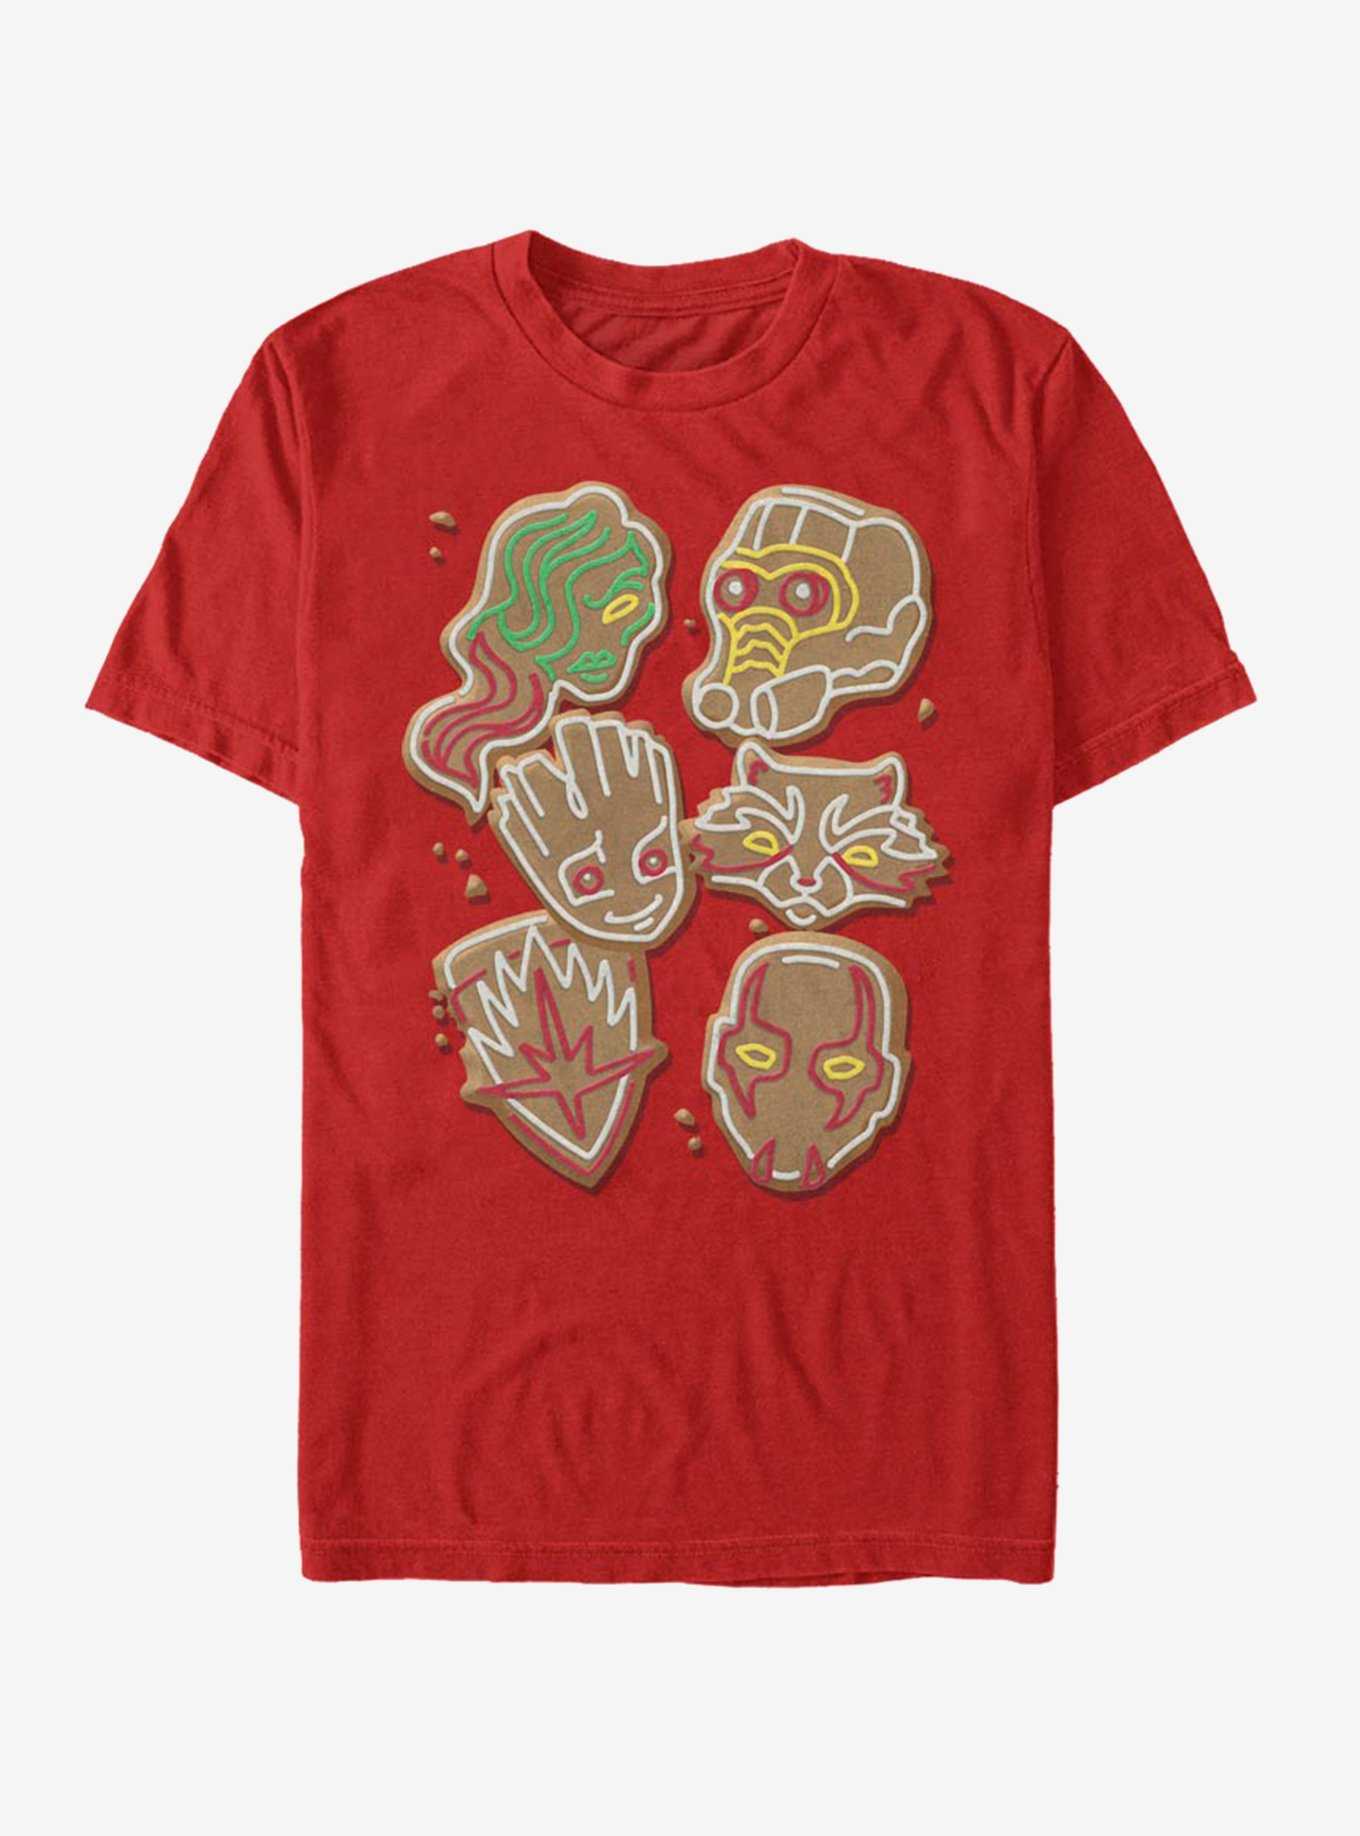 Marvel Guardians Of The Galaxy Christmas Cookies T-Shirt, , hi-res